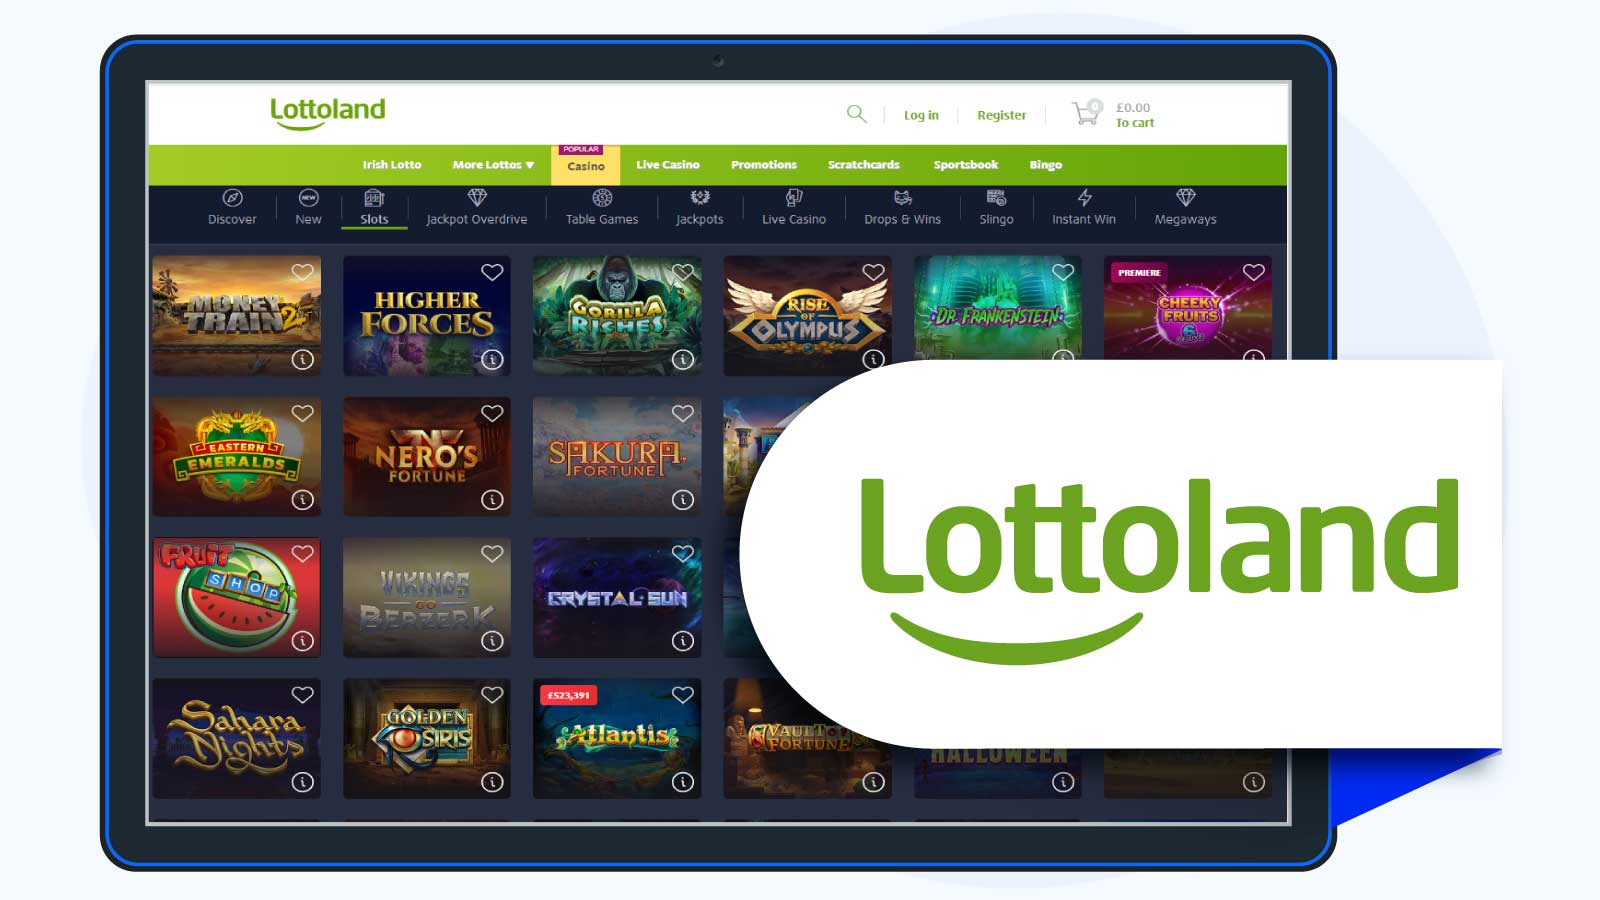 Lottoland 100 Spins on Big Bass Bonanza Best UK Bonus Casino Offer for High Number of Free Spins